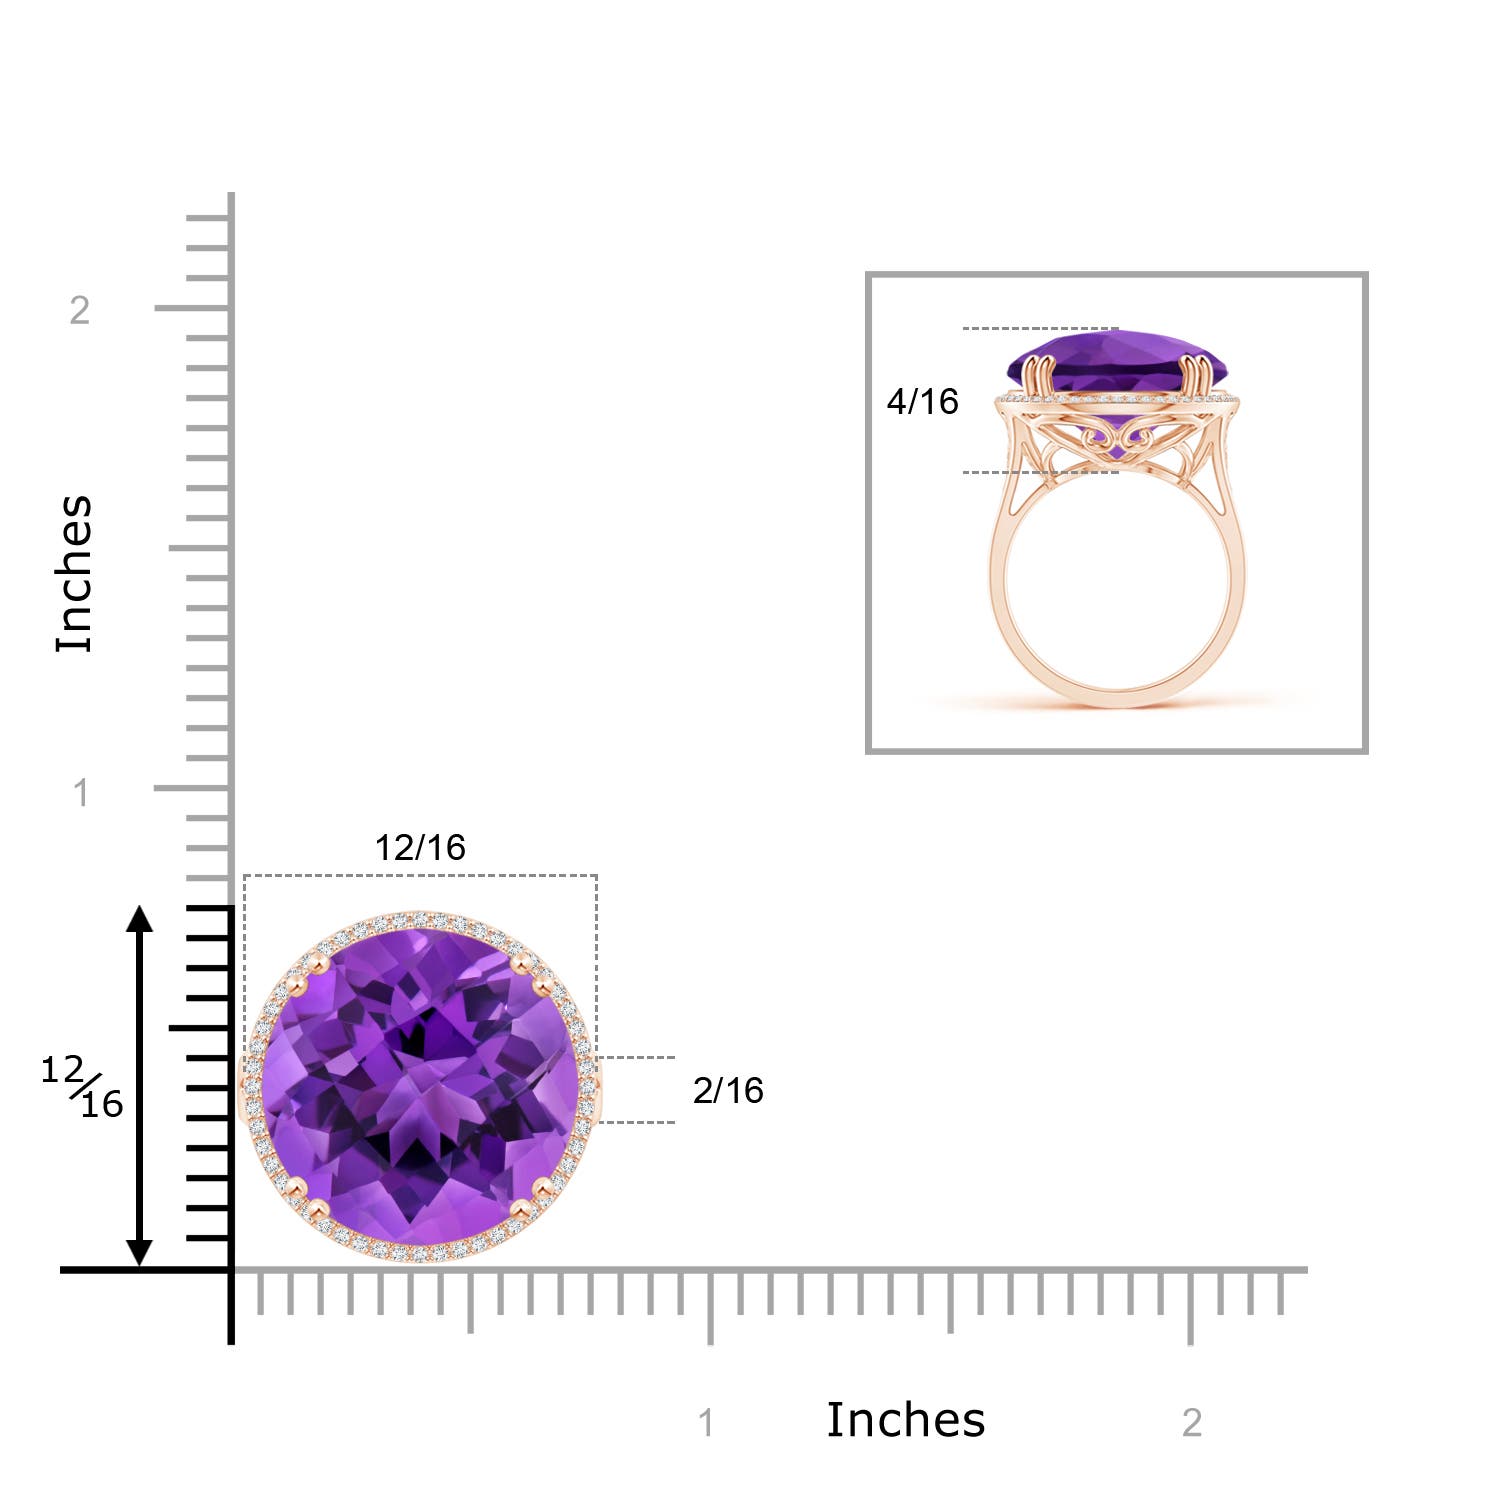 AAA - Amethyst / 15.18 CT / 14 KT Rose Gold